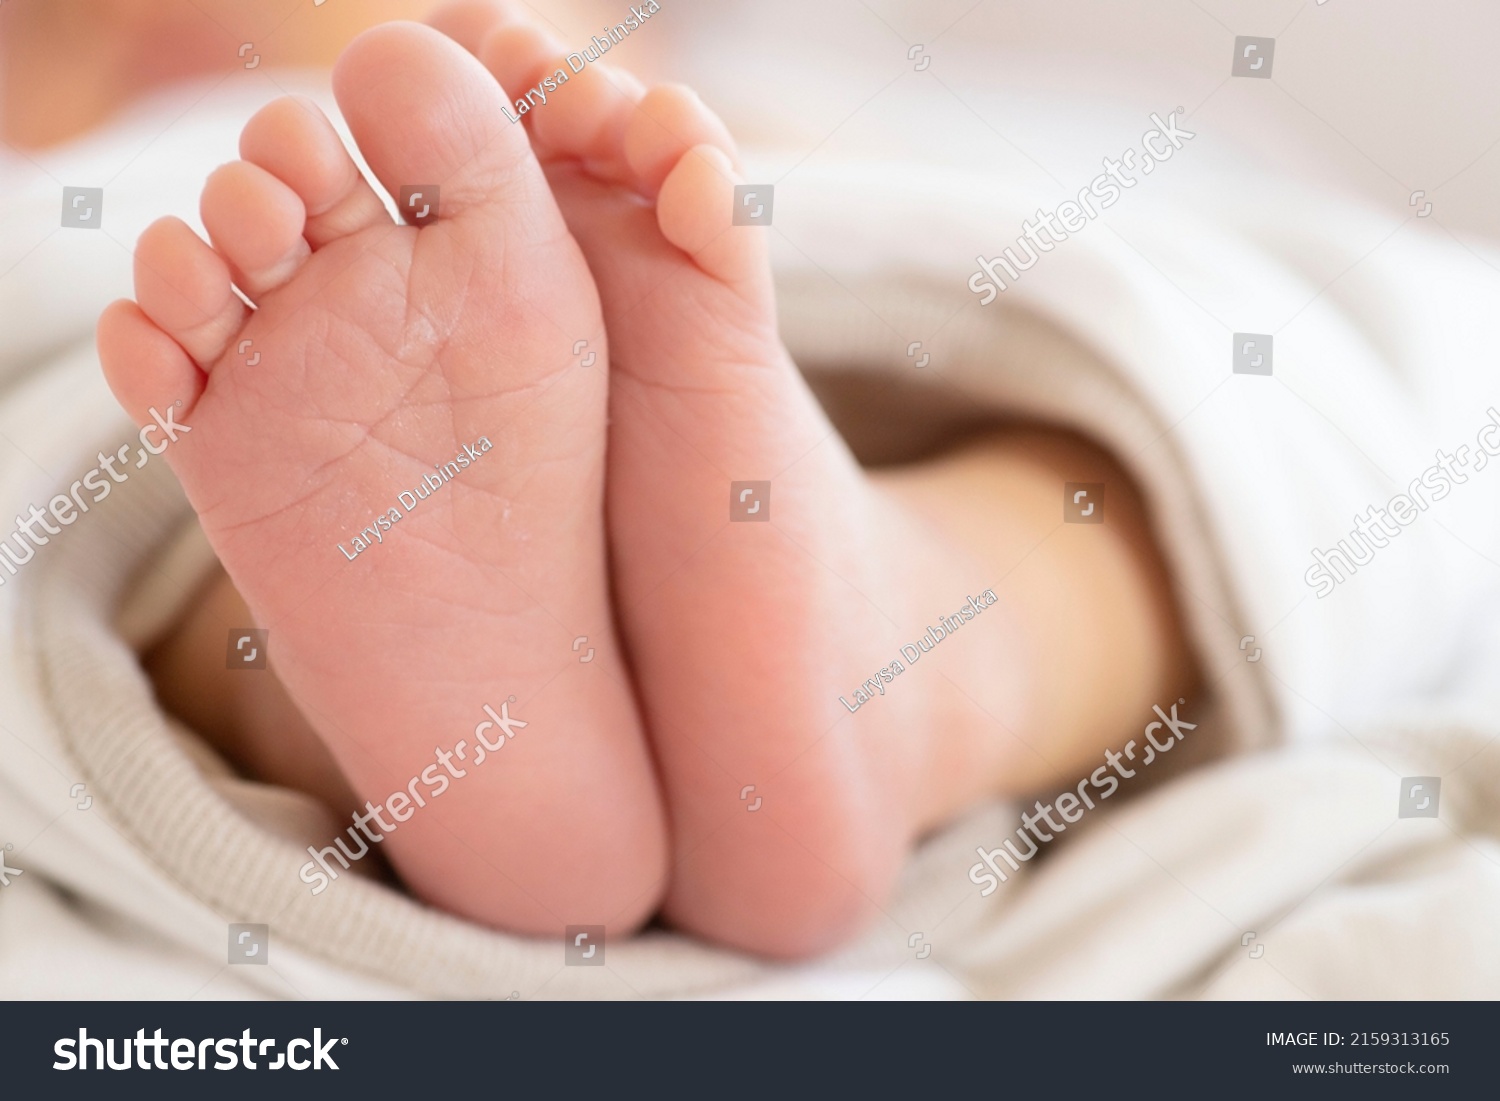 Small bare feet of a newborn covered with a cotton blanket. Daylight. Lifestyle. The concept of motherhood, childhood, parenthood, the first months of a baby's life, the delicate skin of a baby. #2159313165